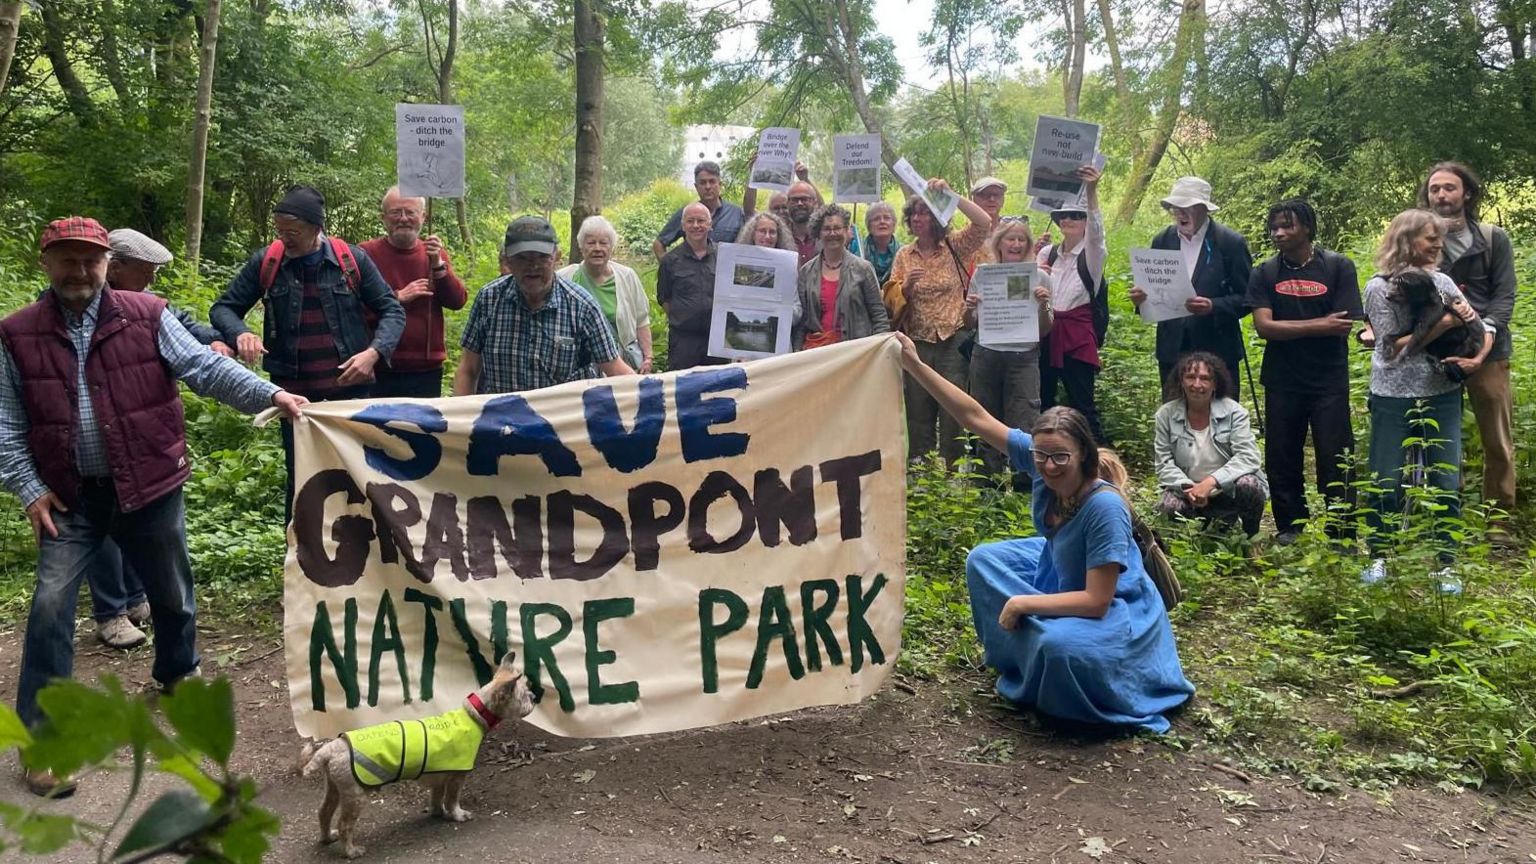 Friends of Grandpont Nature Park in a forest with a 'Save Grandpont Nature Park' banner